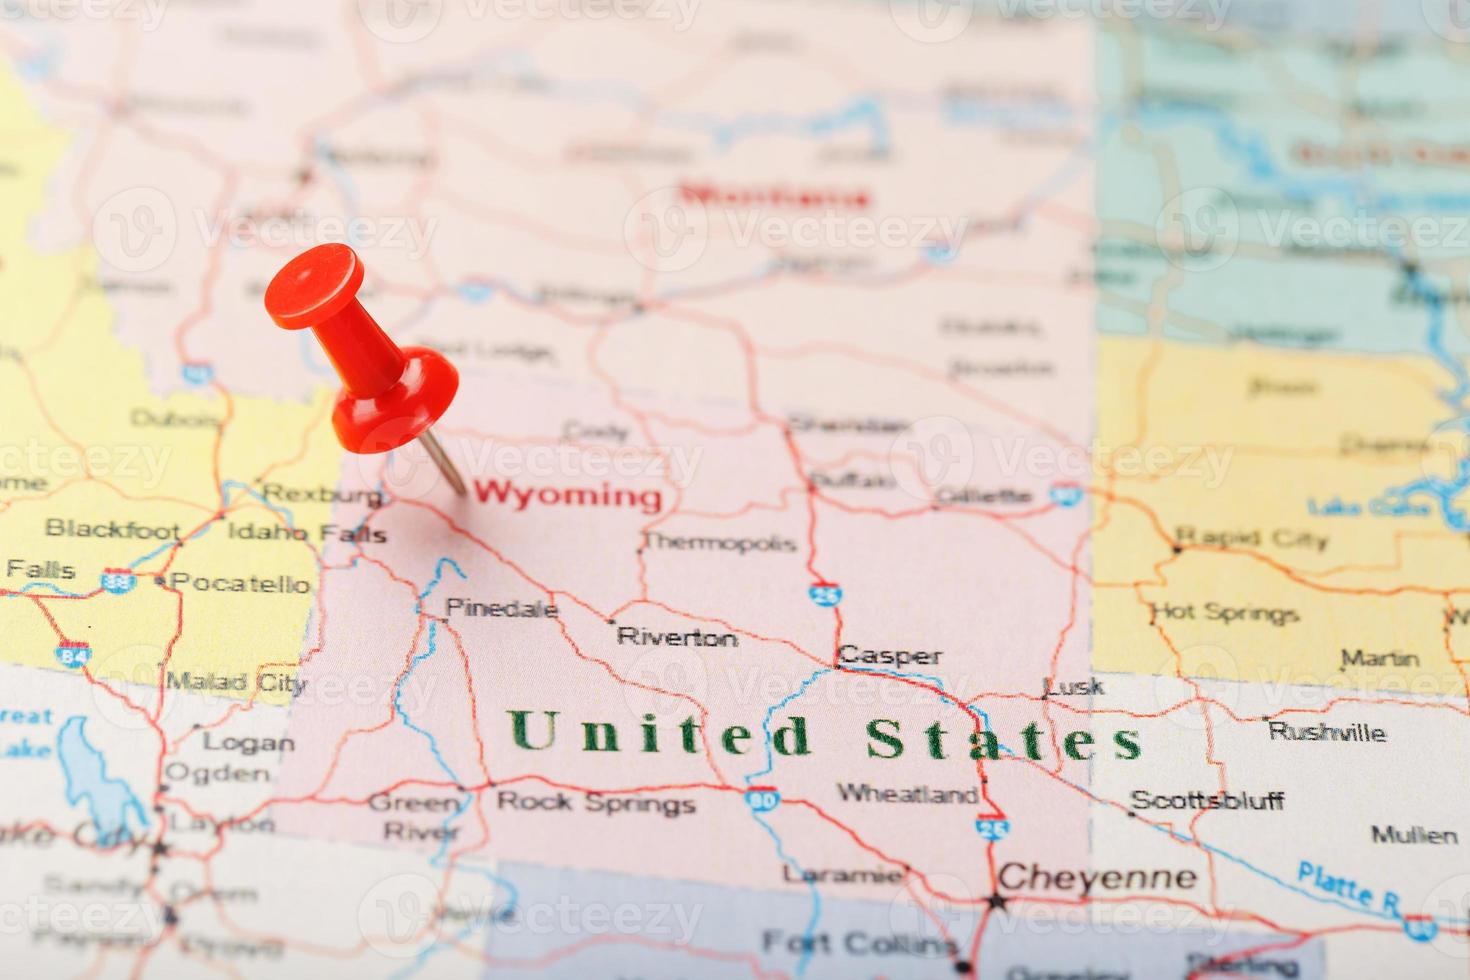 Red clerical needle on a map of USA, Wyoming and the capital Cheyenne. Close up map of wyoming with red tack photo